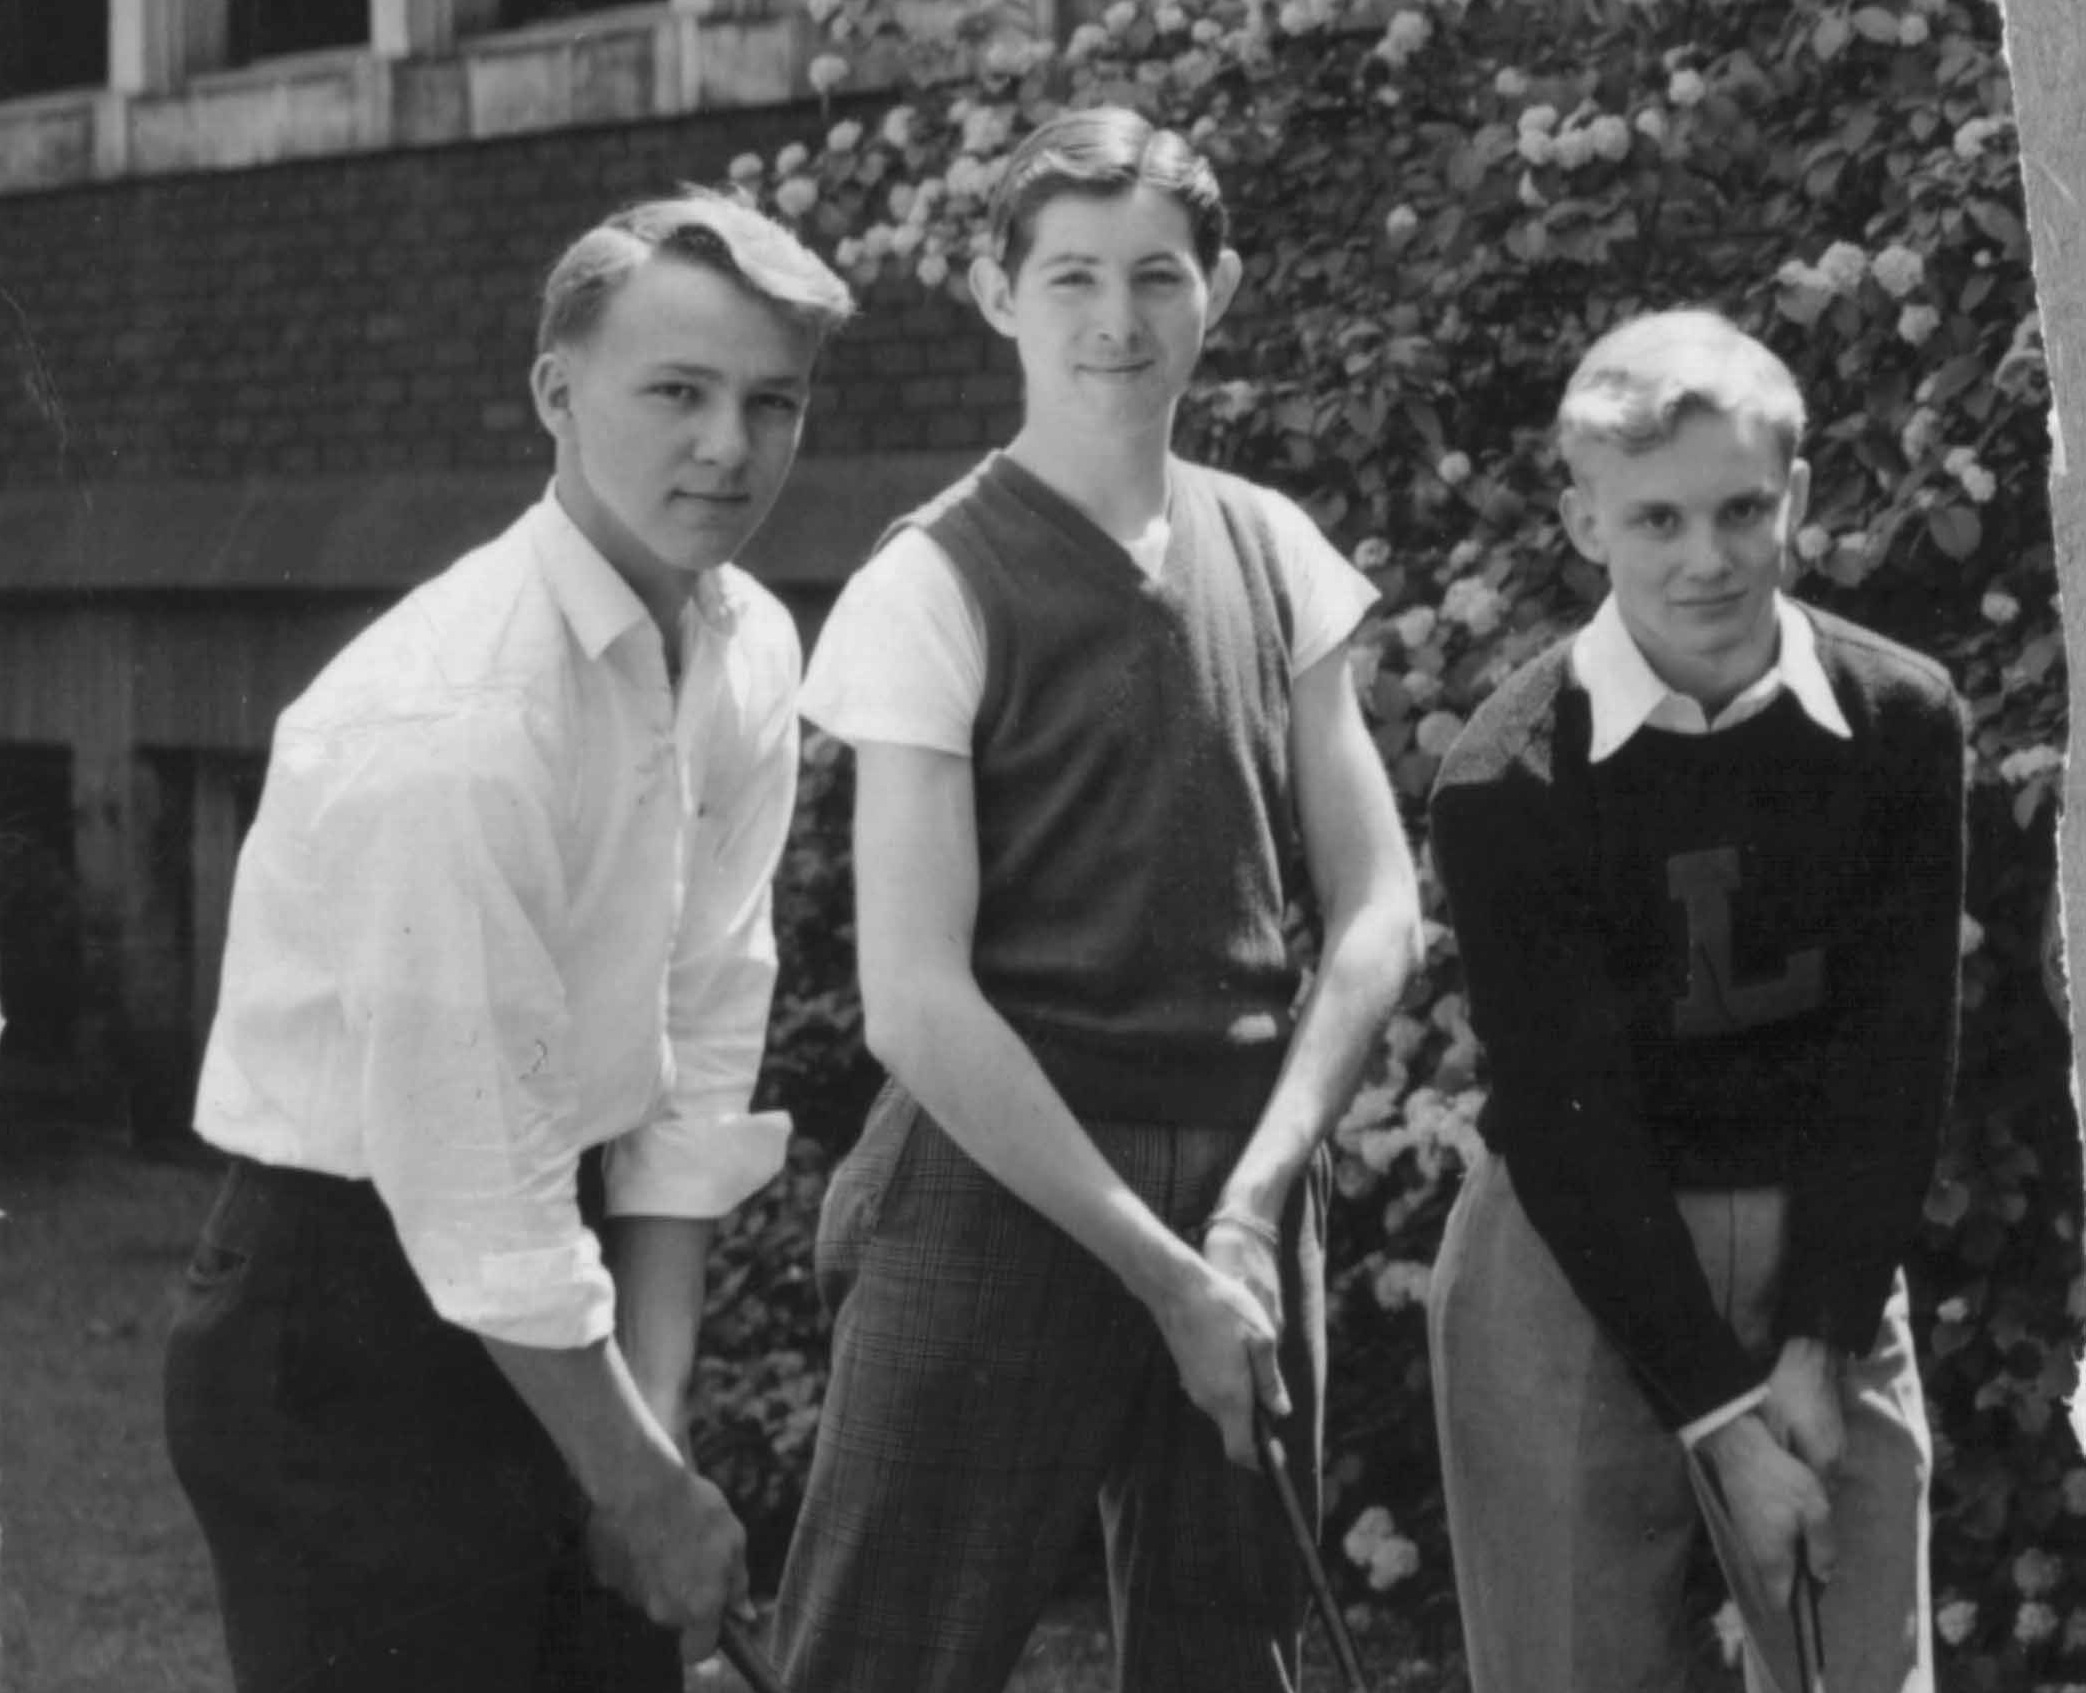 Arnold Palmer, left, with some of his Latrobe High School teammates in the 1940s. (Post-Gazette)